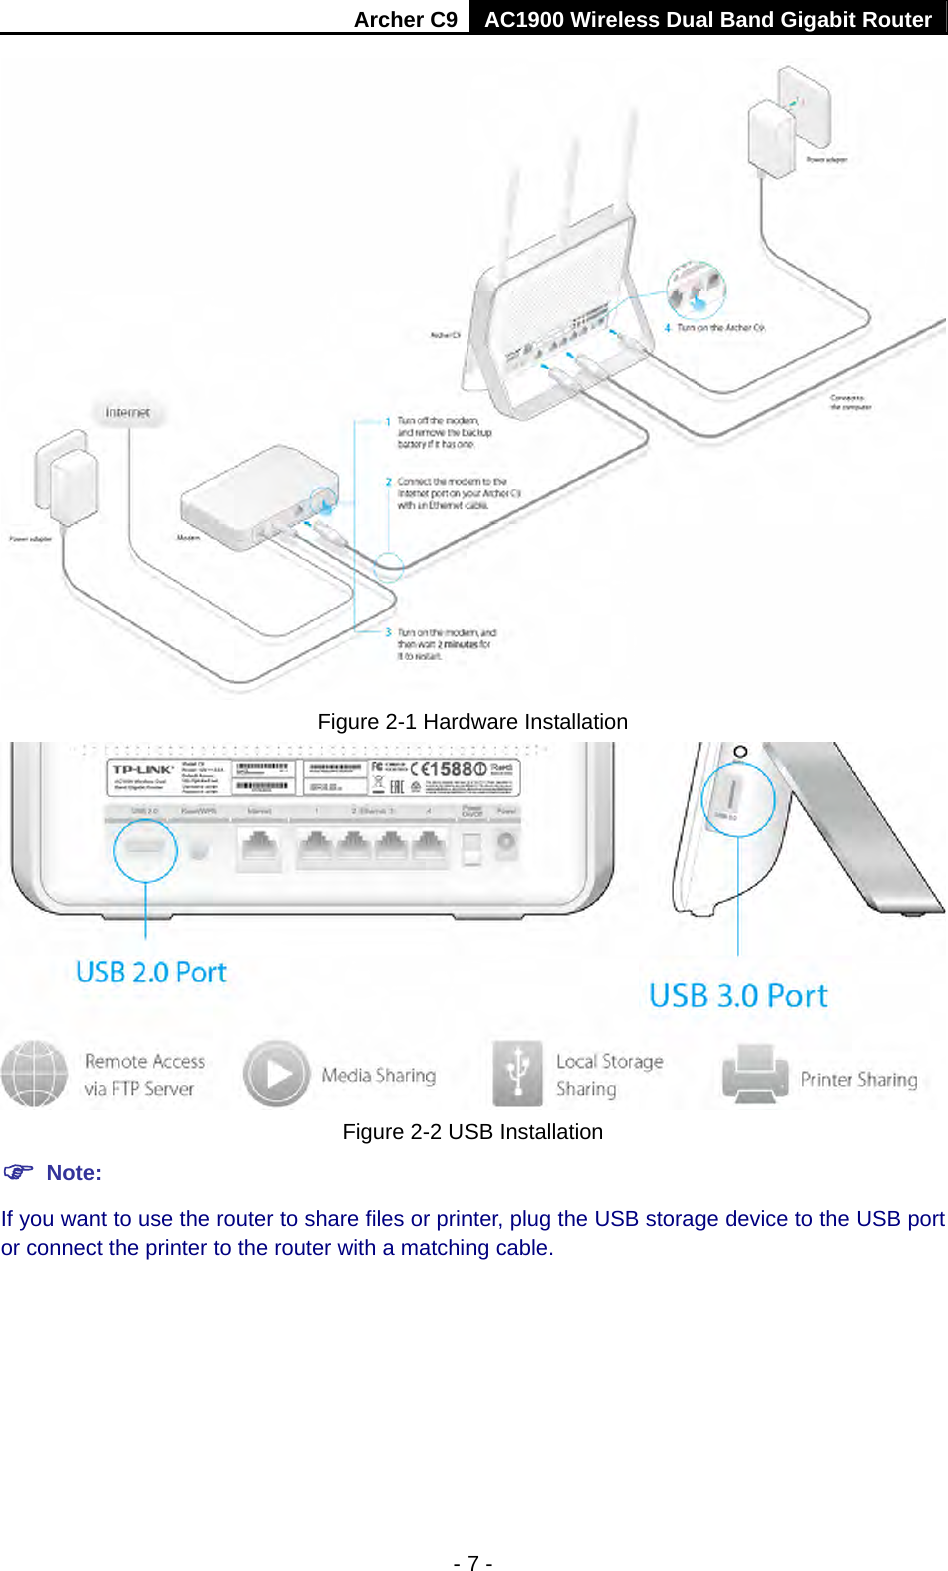 Archer C9 AC1900 Wireless Dual Band Gigabit Router - 7 -  Figure 2-1 Hardware Installation    Figure 2-2 USB Installation  Note: If you want to use the router to share files or printer, plug the USB storage device to the USB port or connect the printer to the router with a matching cable.  